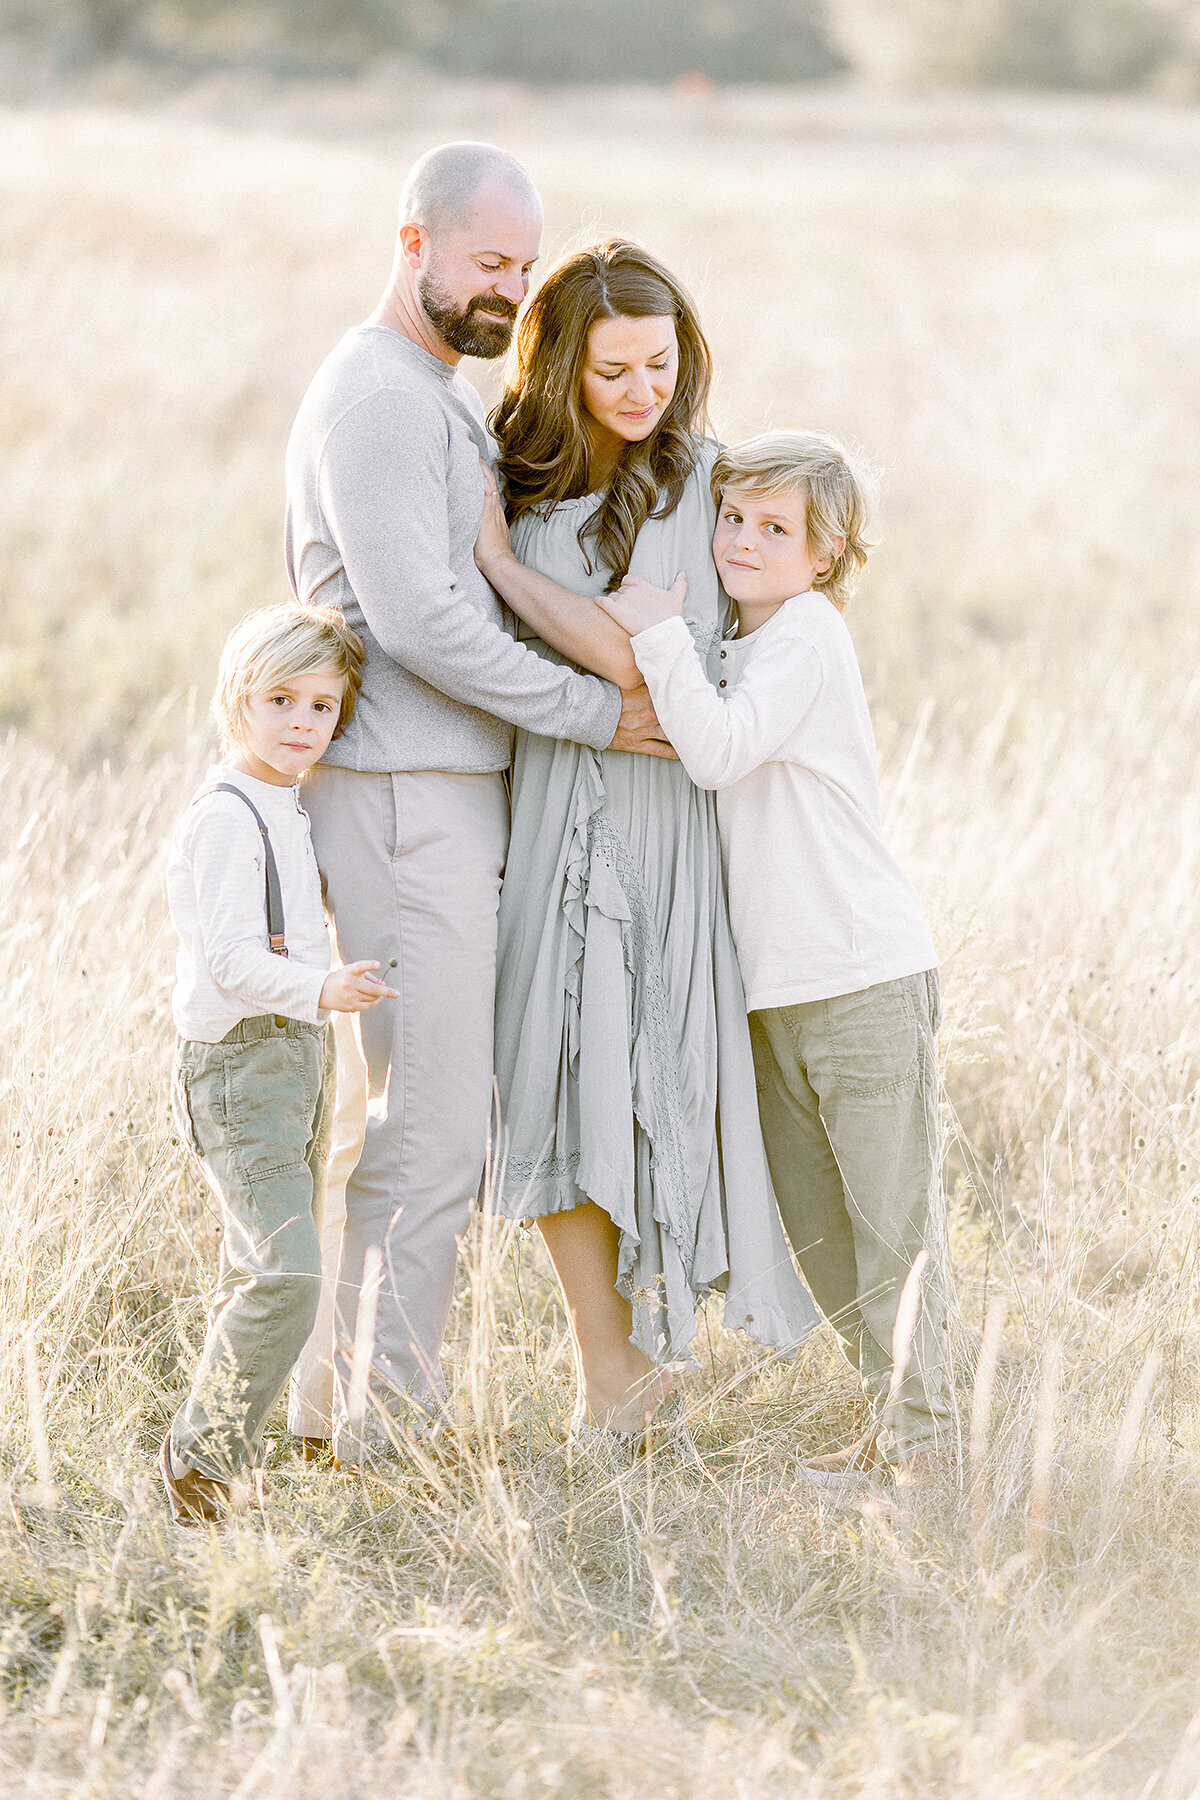 A Frisco family standing in a local park field as they hold each other and pose for family photos.